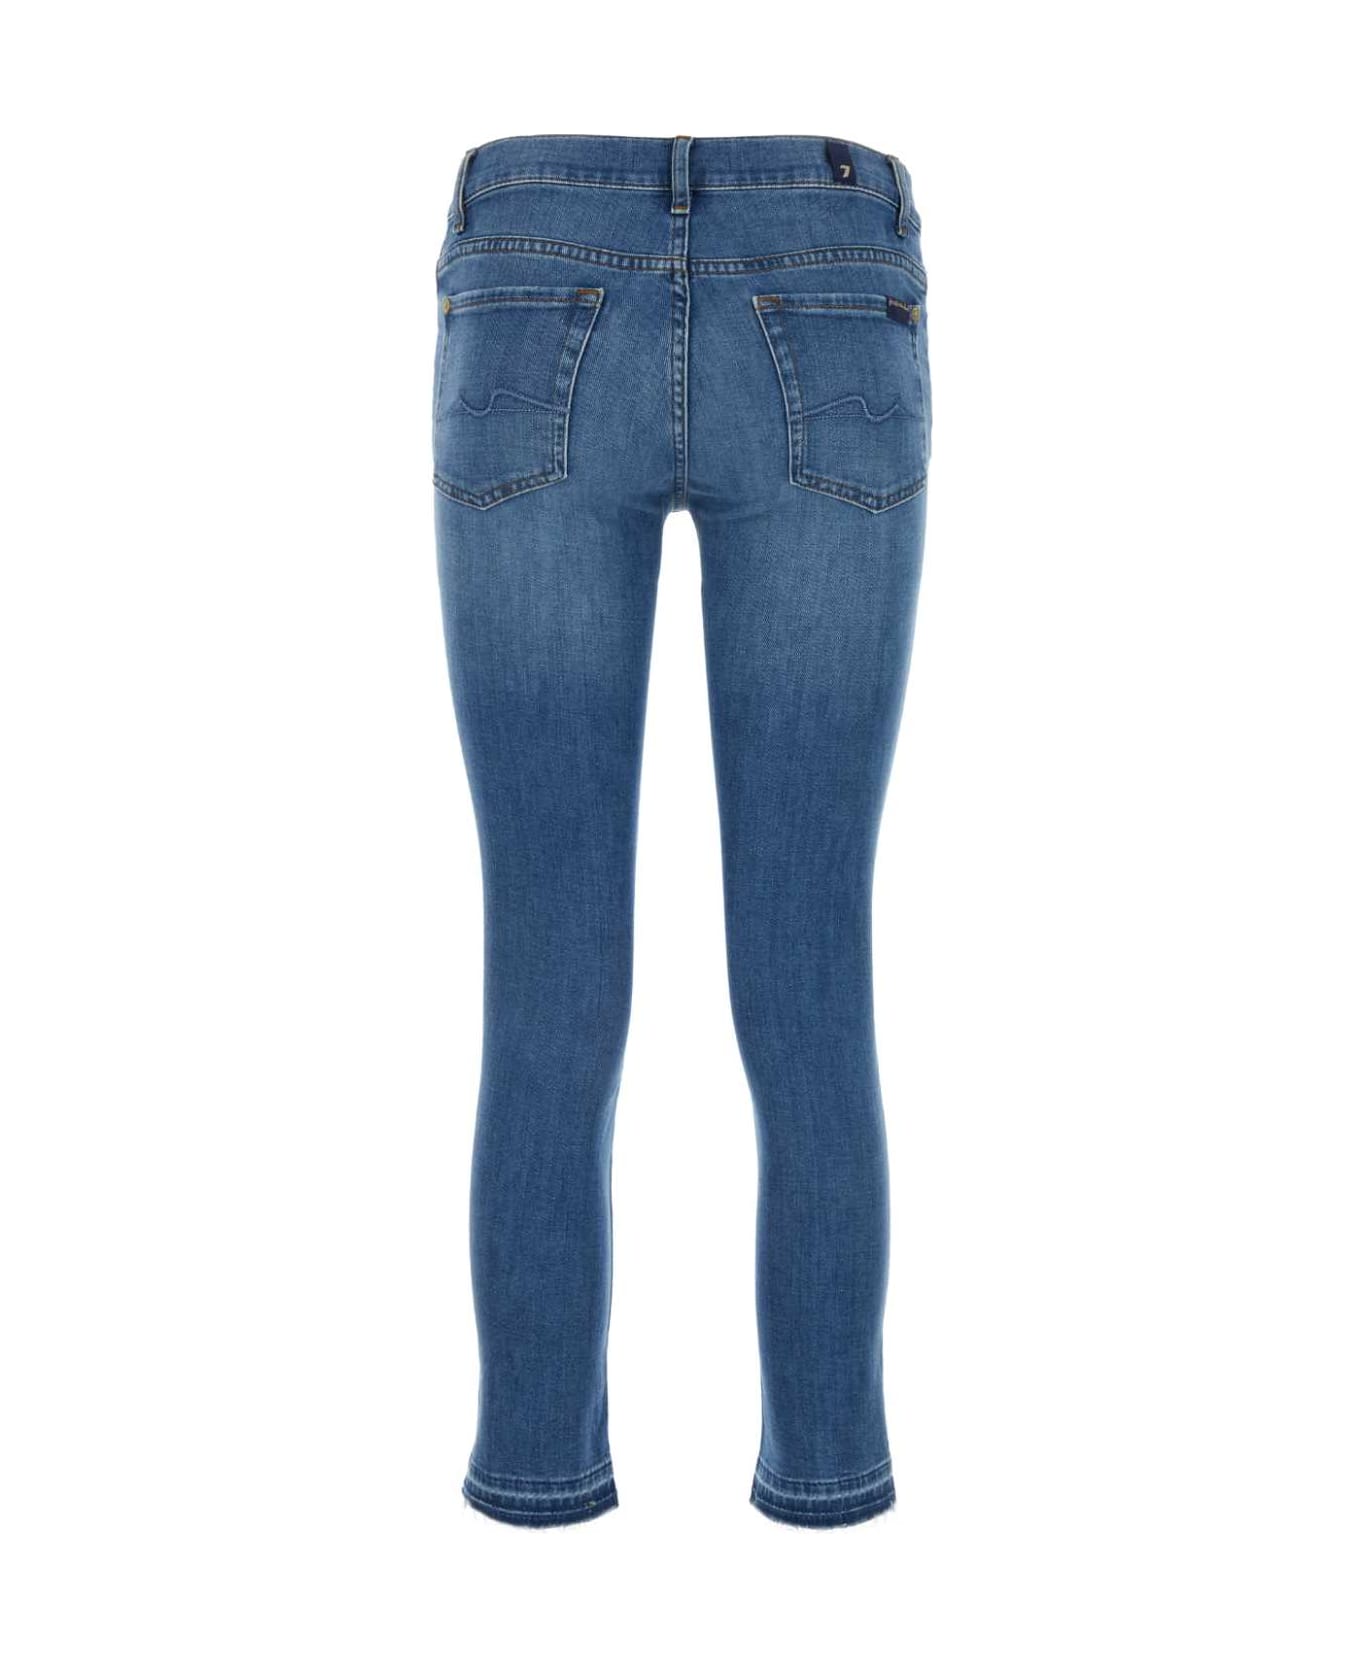 7 For All Mankind Stretch Denim Roxanne Jeans - LAVAGGIOSCURO